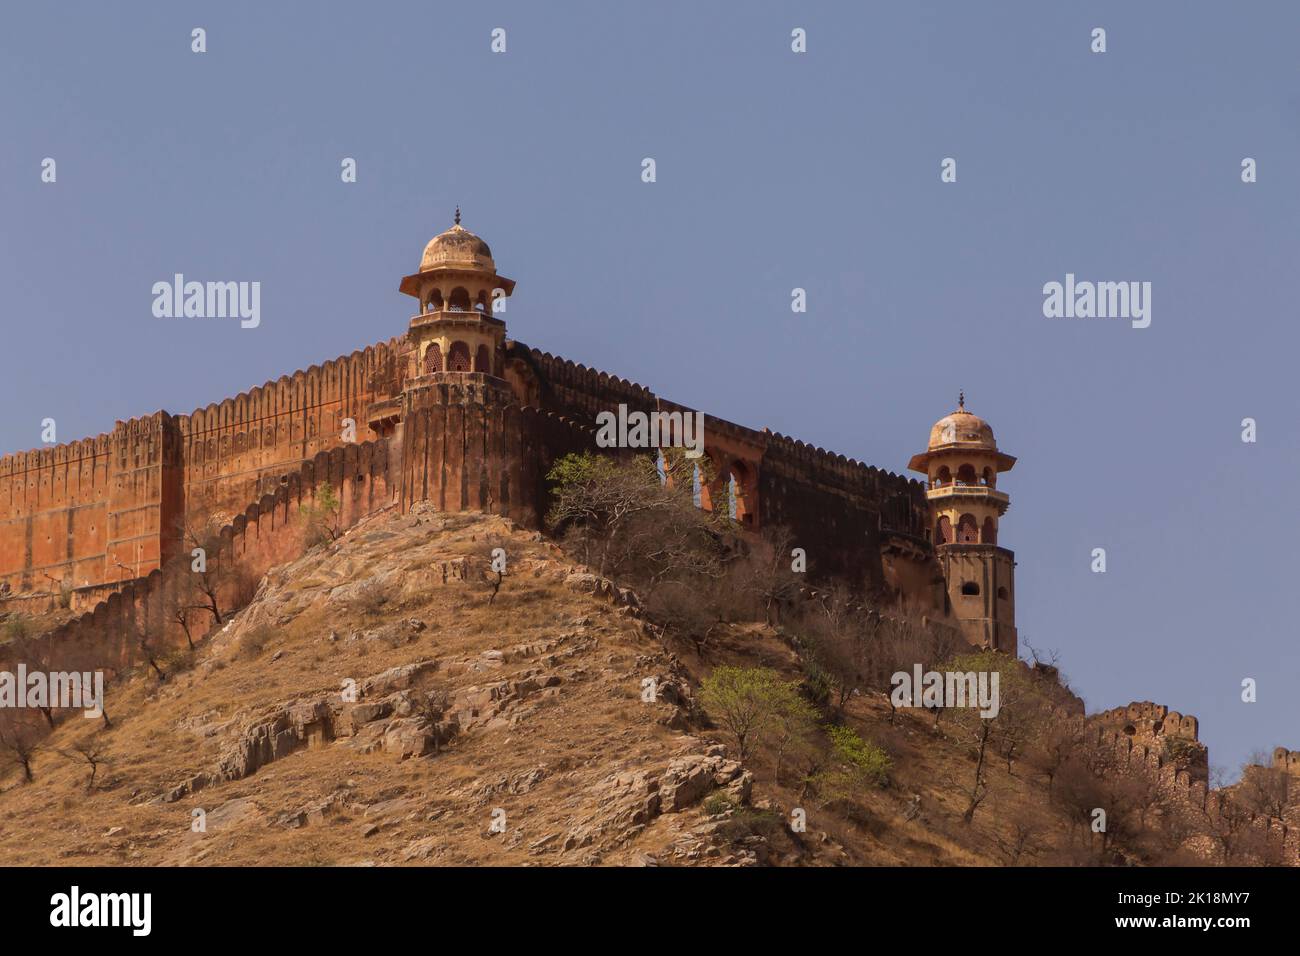 outside view on Jaigarh Fort at Amer city in India Stock Photo